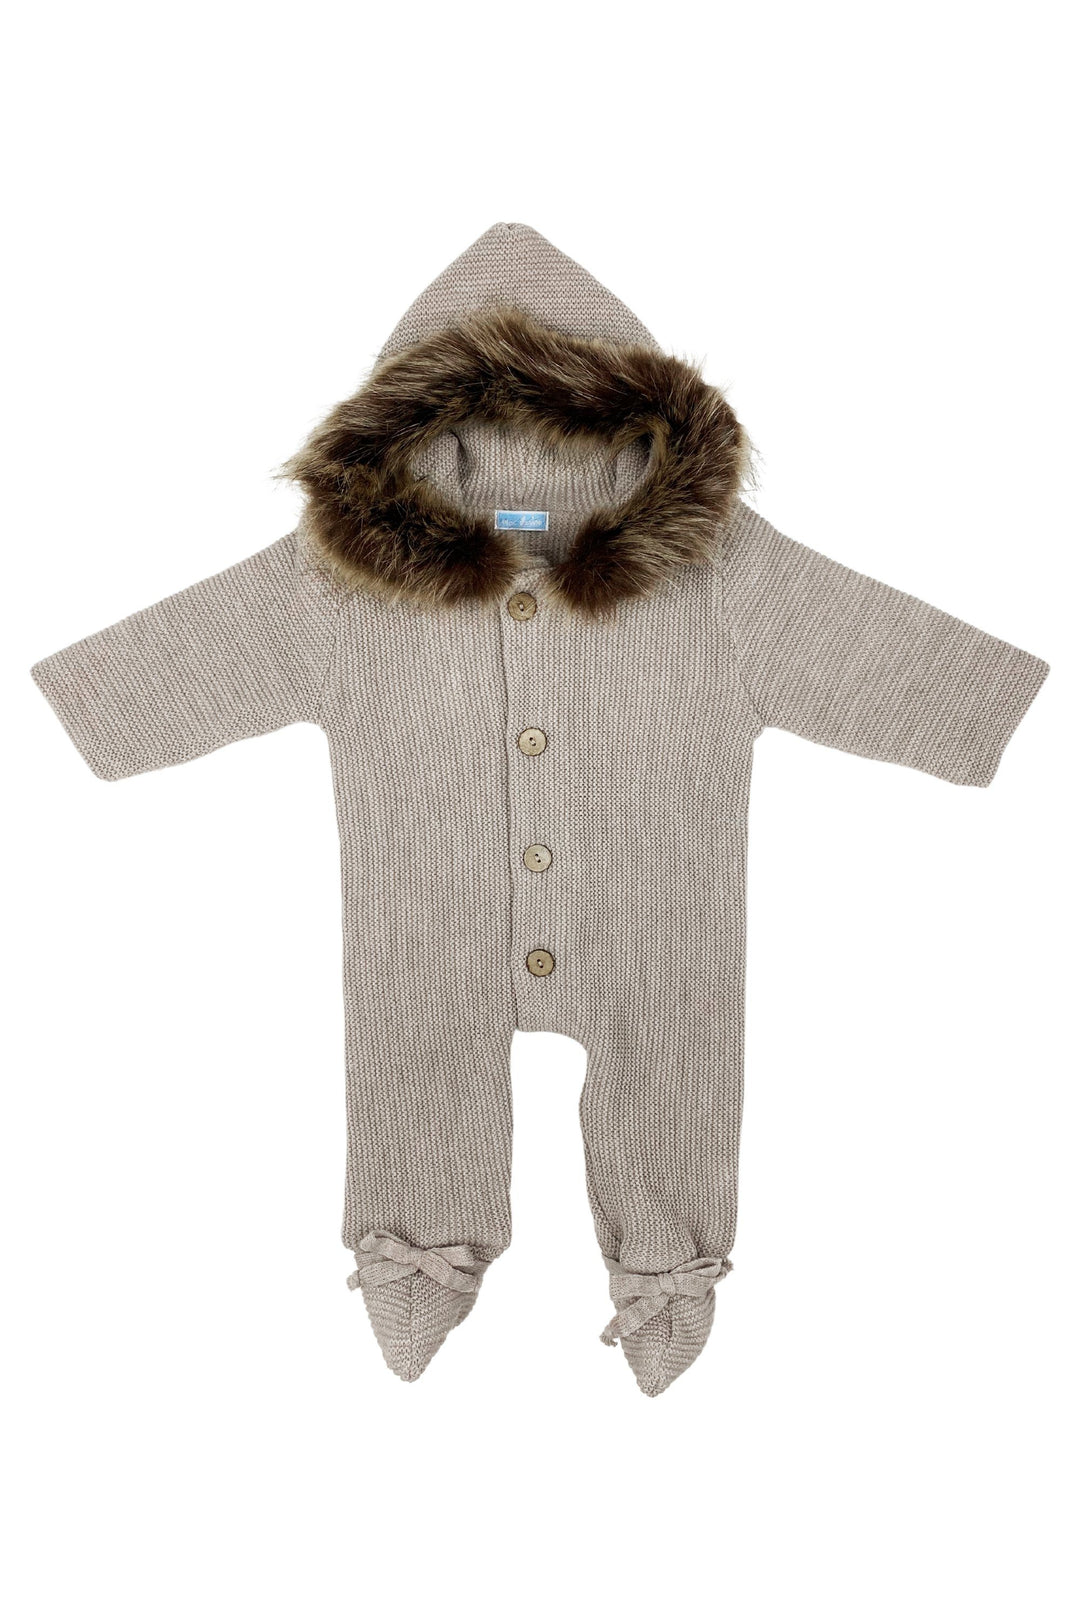 Mac Ilusión Faux Fur Trimmed Knitted Snowsuit | Millie and John